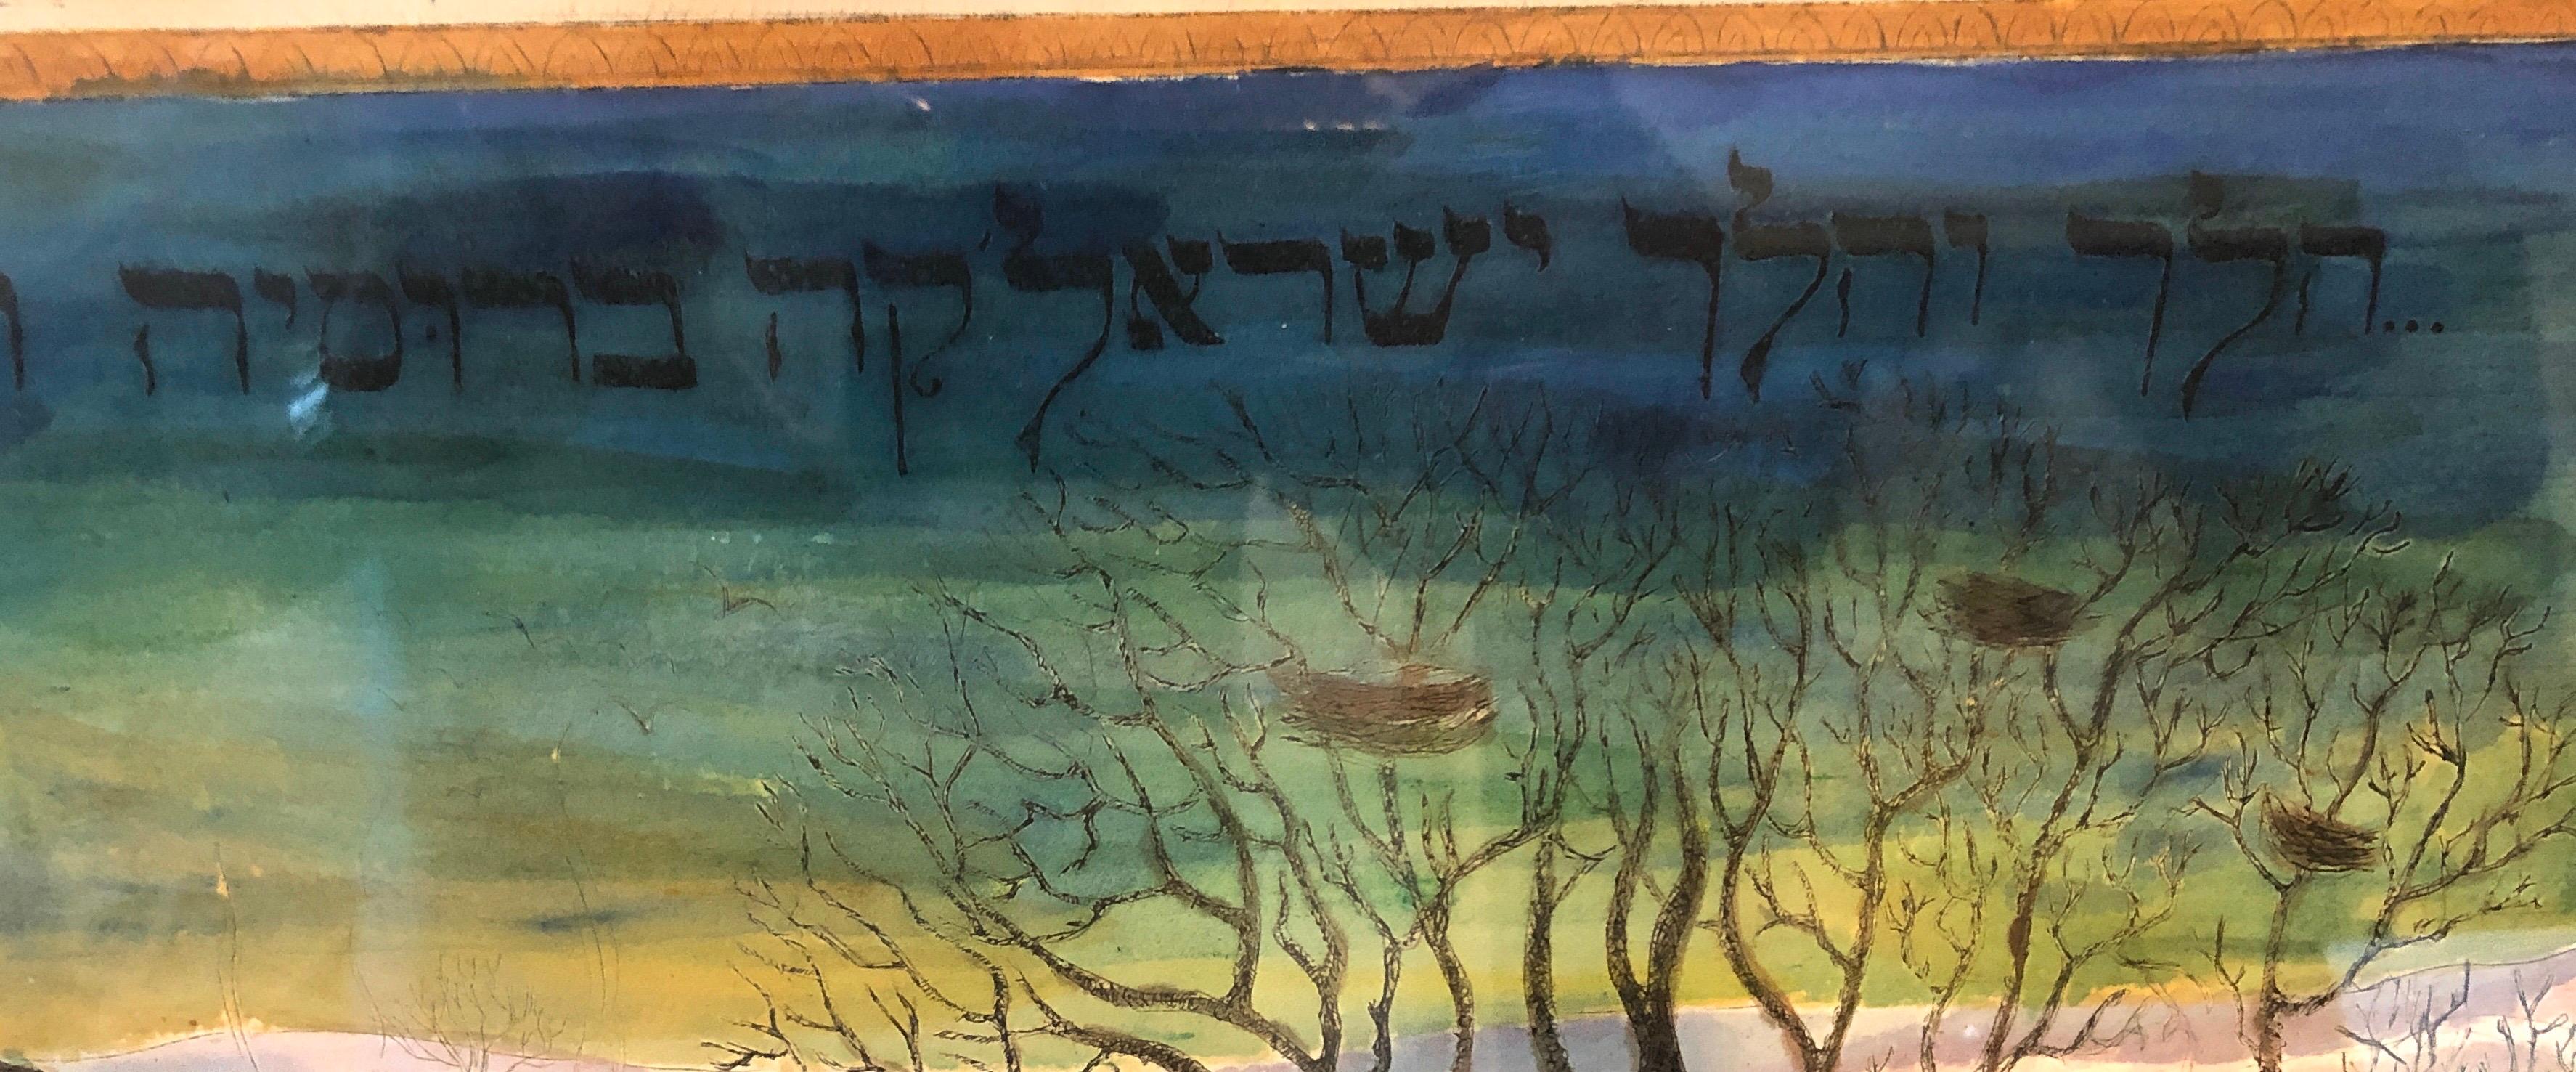 Hand-Colored, with watercolor painting, Etching hand signed in pencil l.r. in Hebrew, l.l. in English. Rare A/P artist proof.

EUGENE ABESHAUS Leningrad, Russia, b. 1939, d. 2008

Eugene Abeshaus (also spelled Evgeny Abezgauz, Евгений Абезгауз in